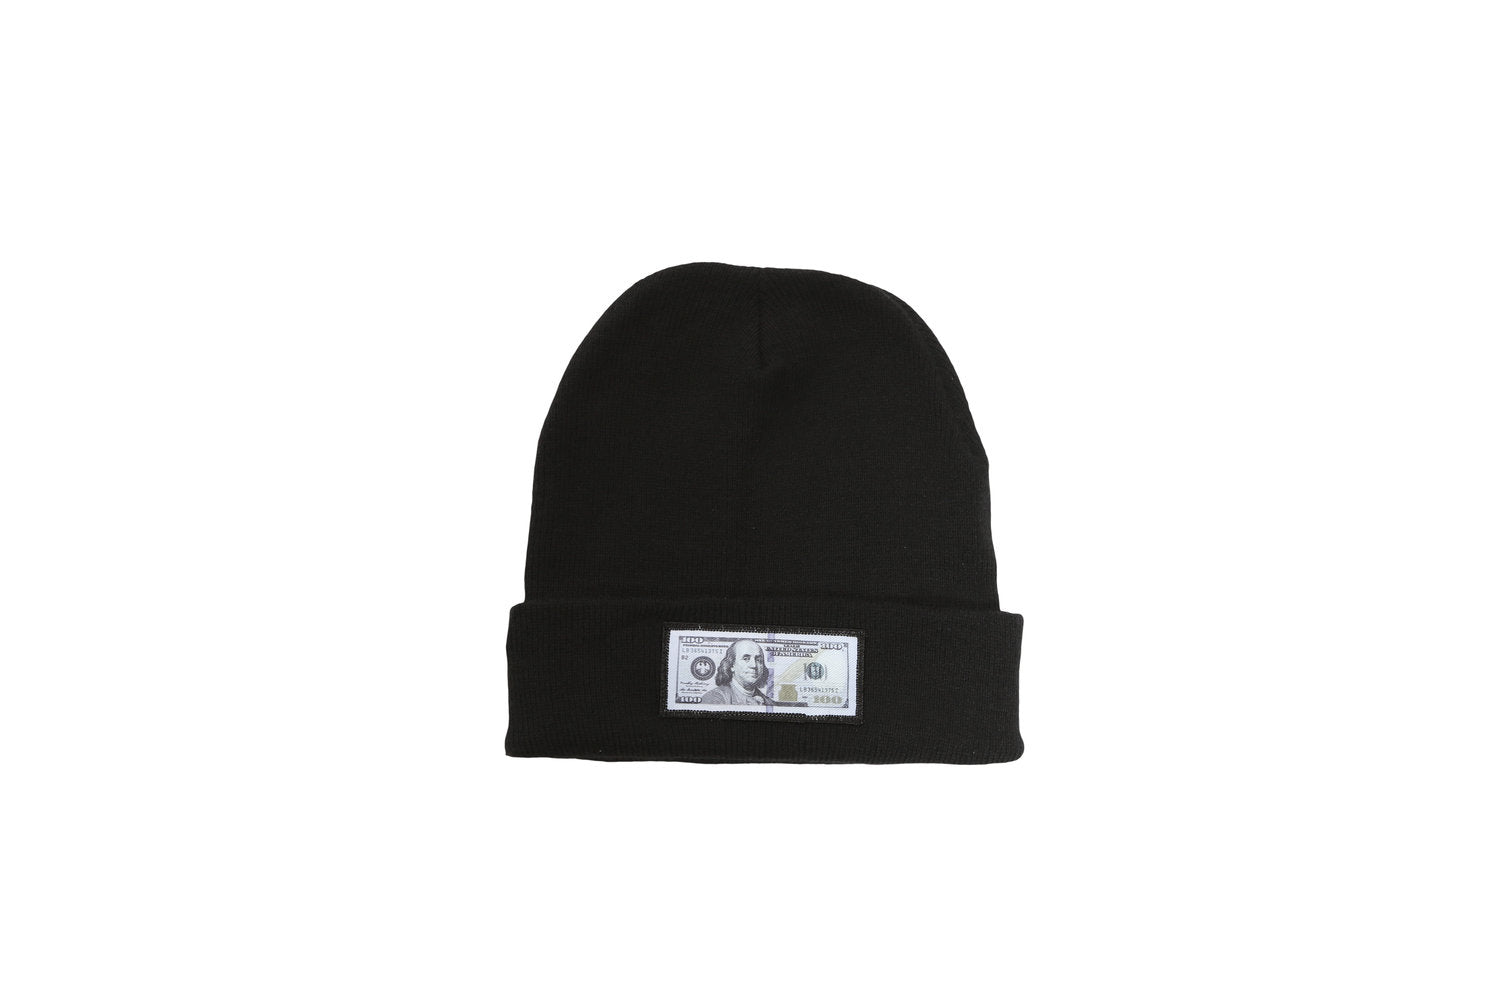 Black comfy beanie with $100 logo on front